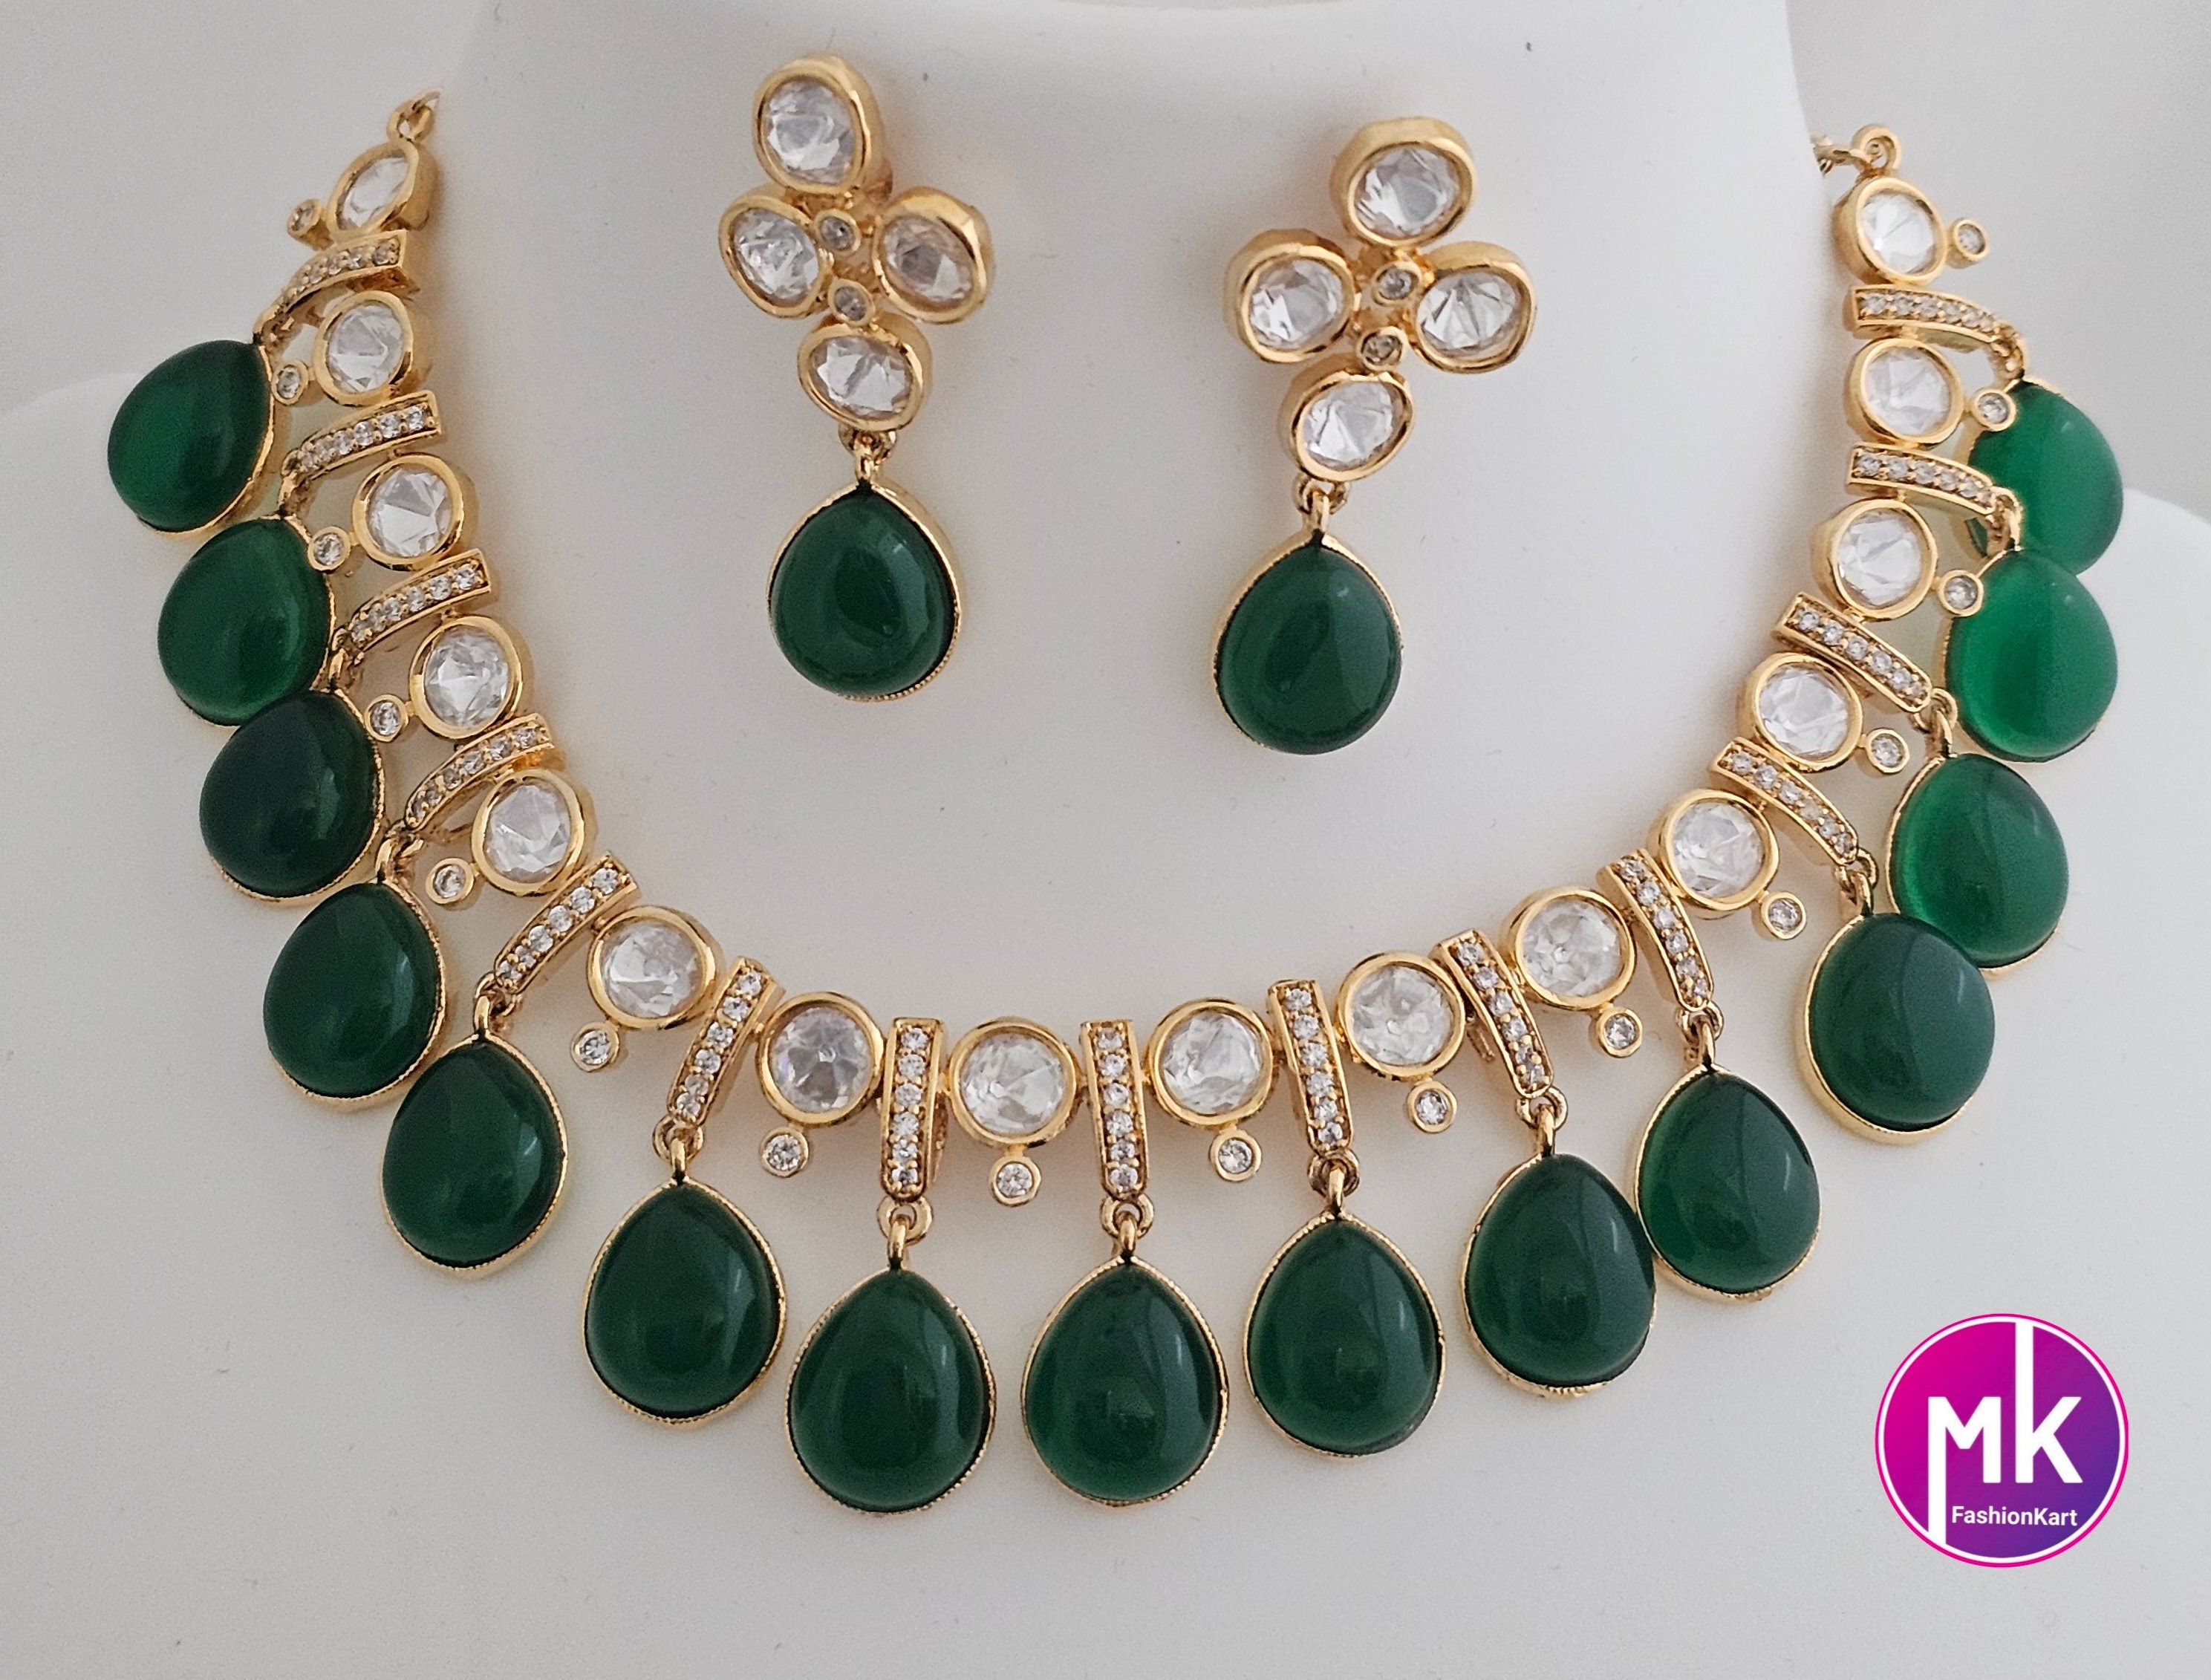 Polki stone Premium Quality Gold polish Necklace with Emerald Hangings and matching polki stone Emerald hanging Earrings